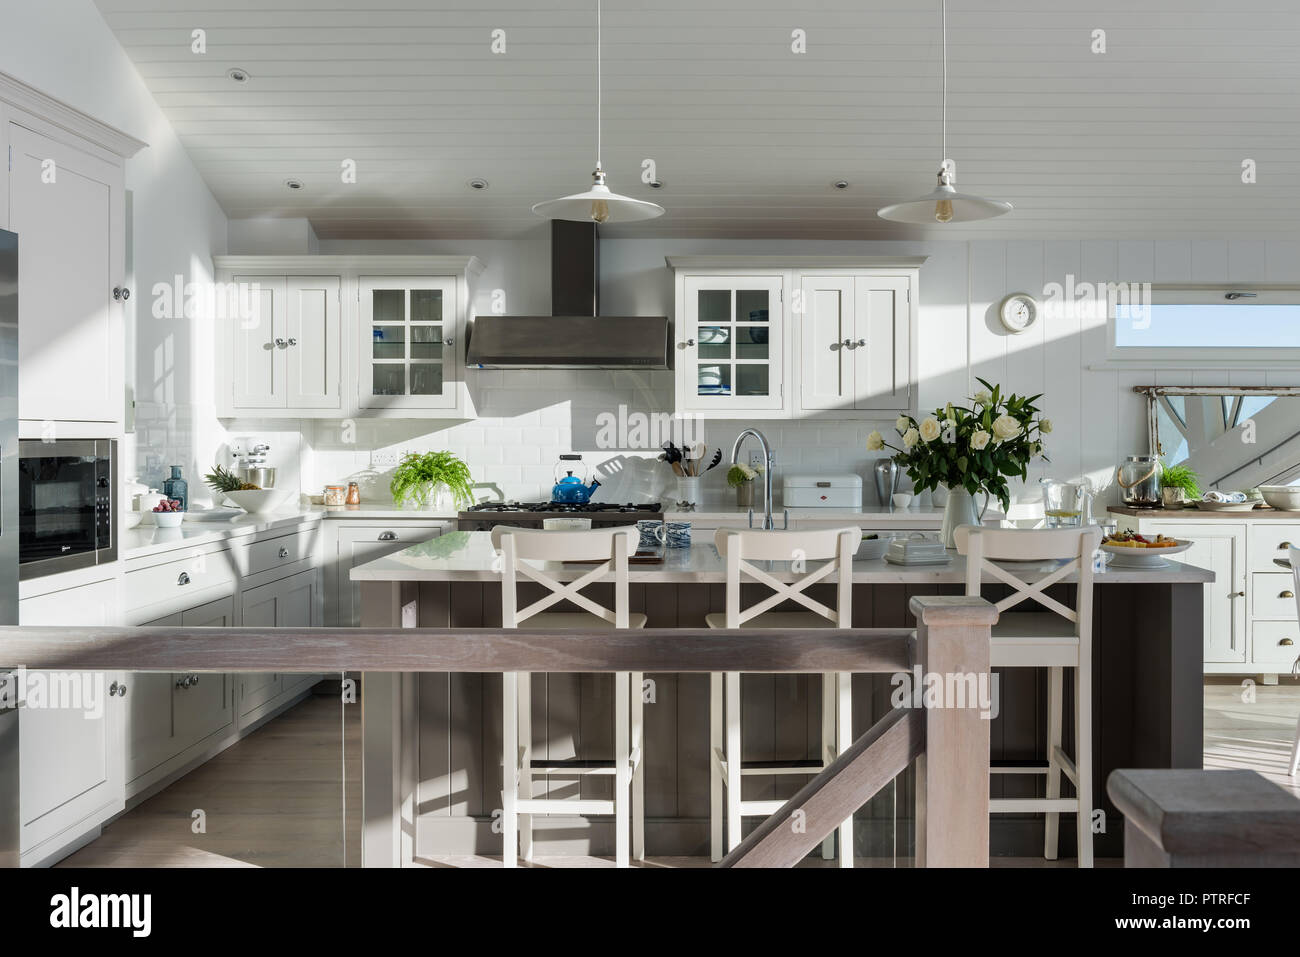 Shaker-style kitchen with pendant lights and white roses Stock Photo